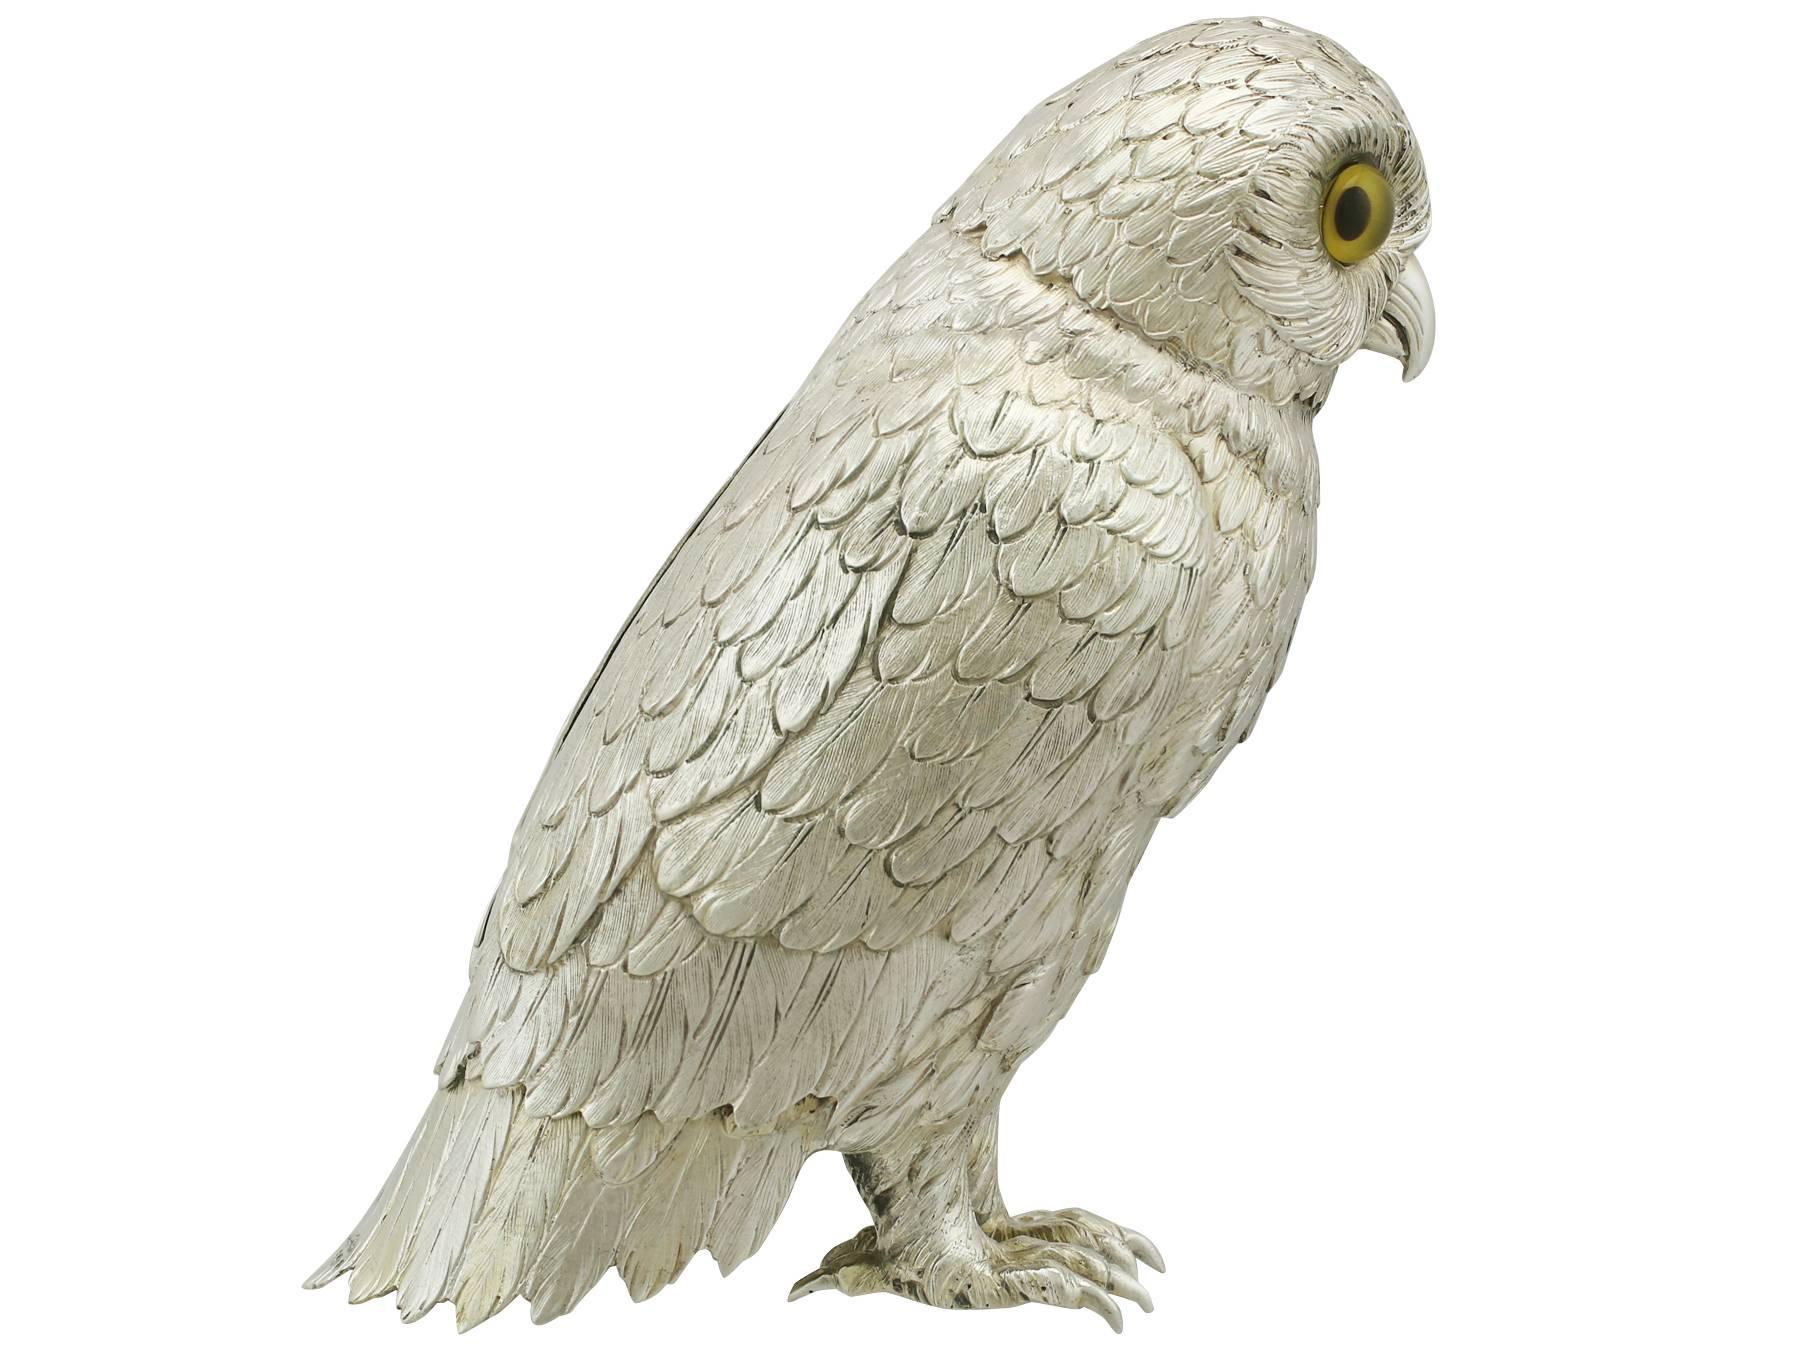 An exceptional, fine and impressive, large vintage Elizabeth II sterling silver ornament realistically modelled in the form of an owl; an addition to our animal related silverware collection

This exceptional vintage cast sterling silver ornament